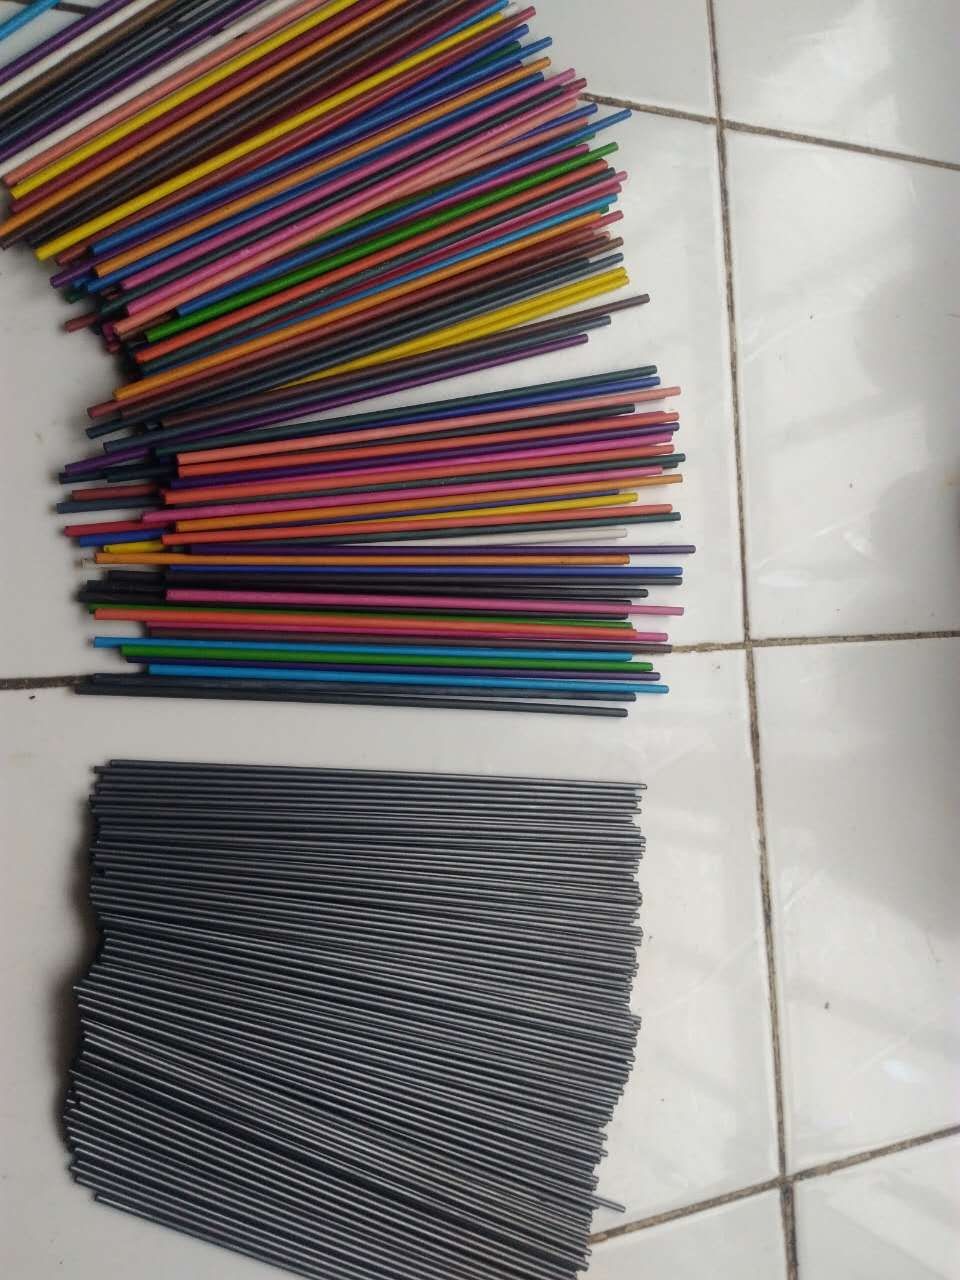 China pencil lead factory